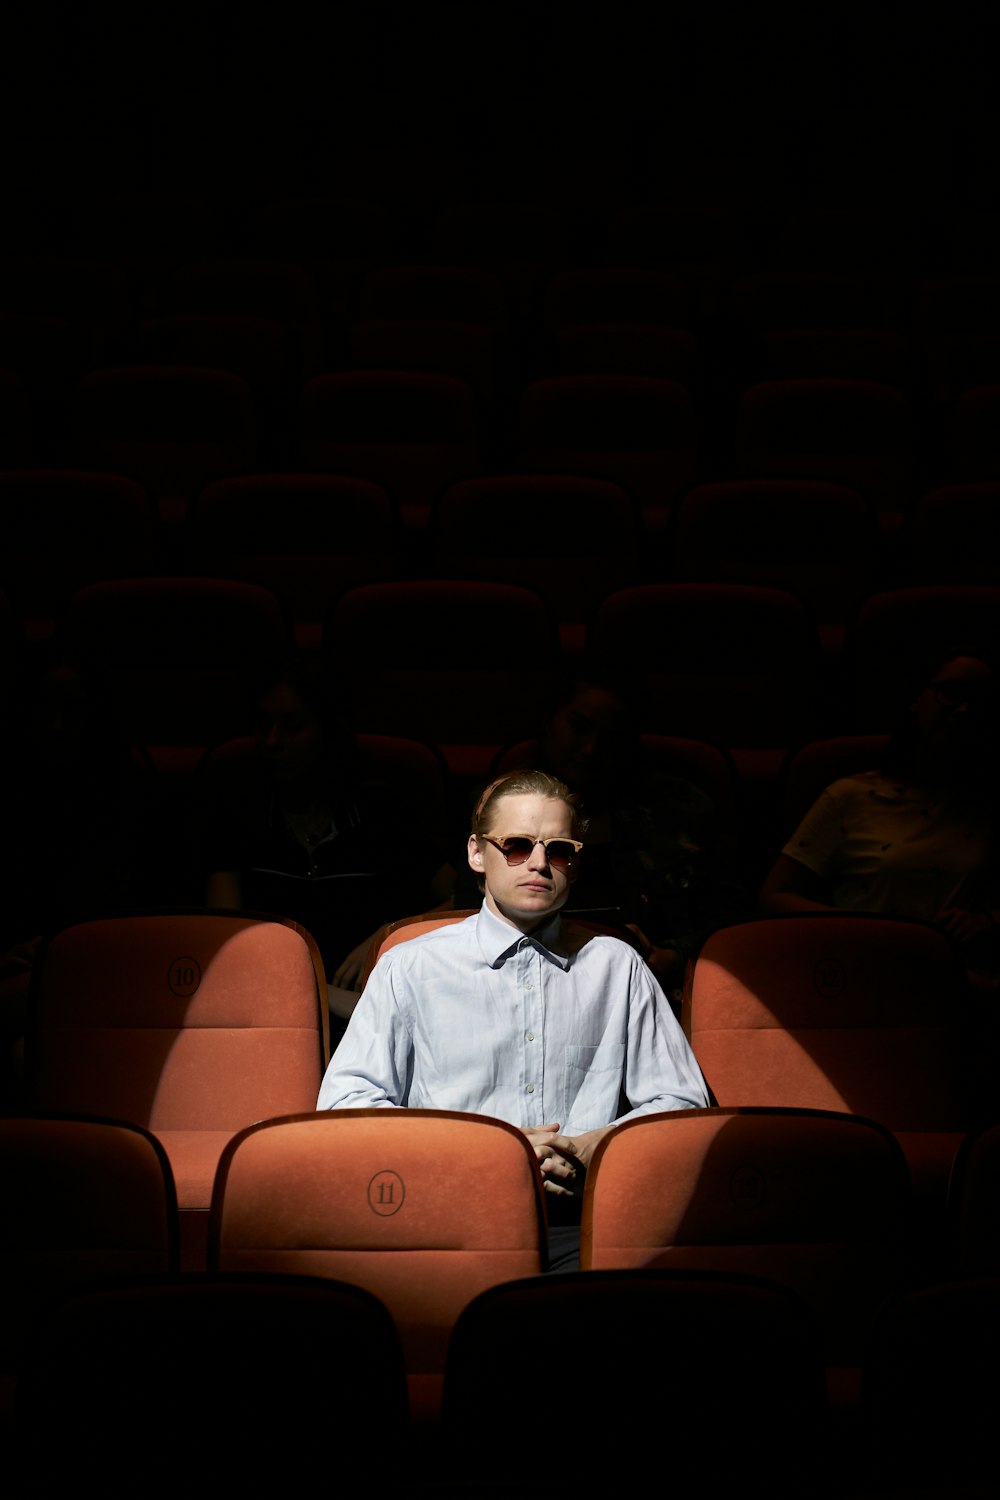 man in blue dress shirt wearing sunglasses sitting on brown chair